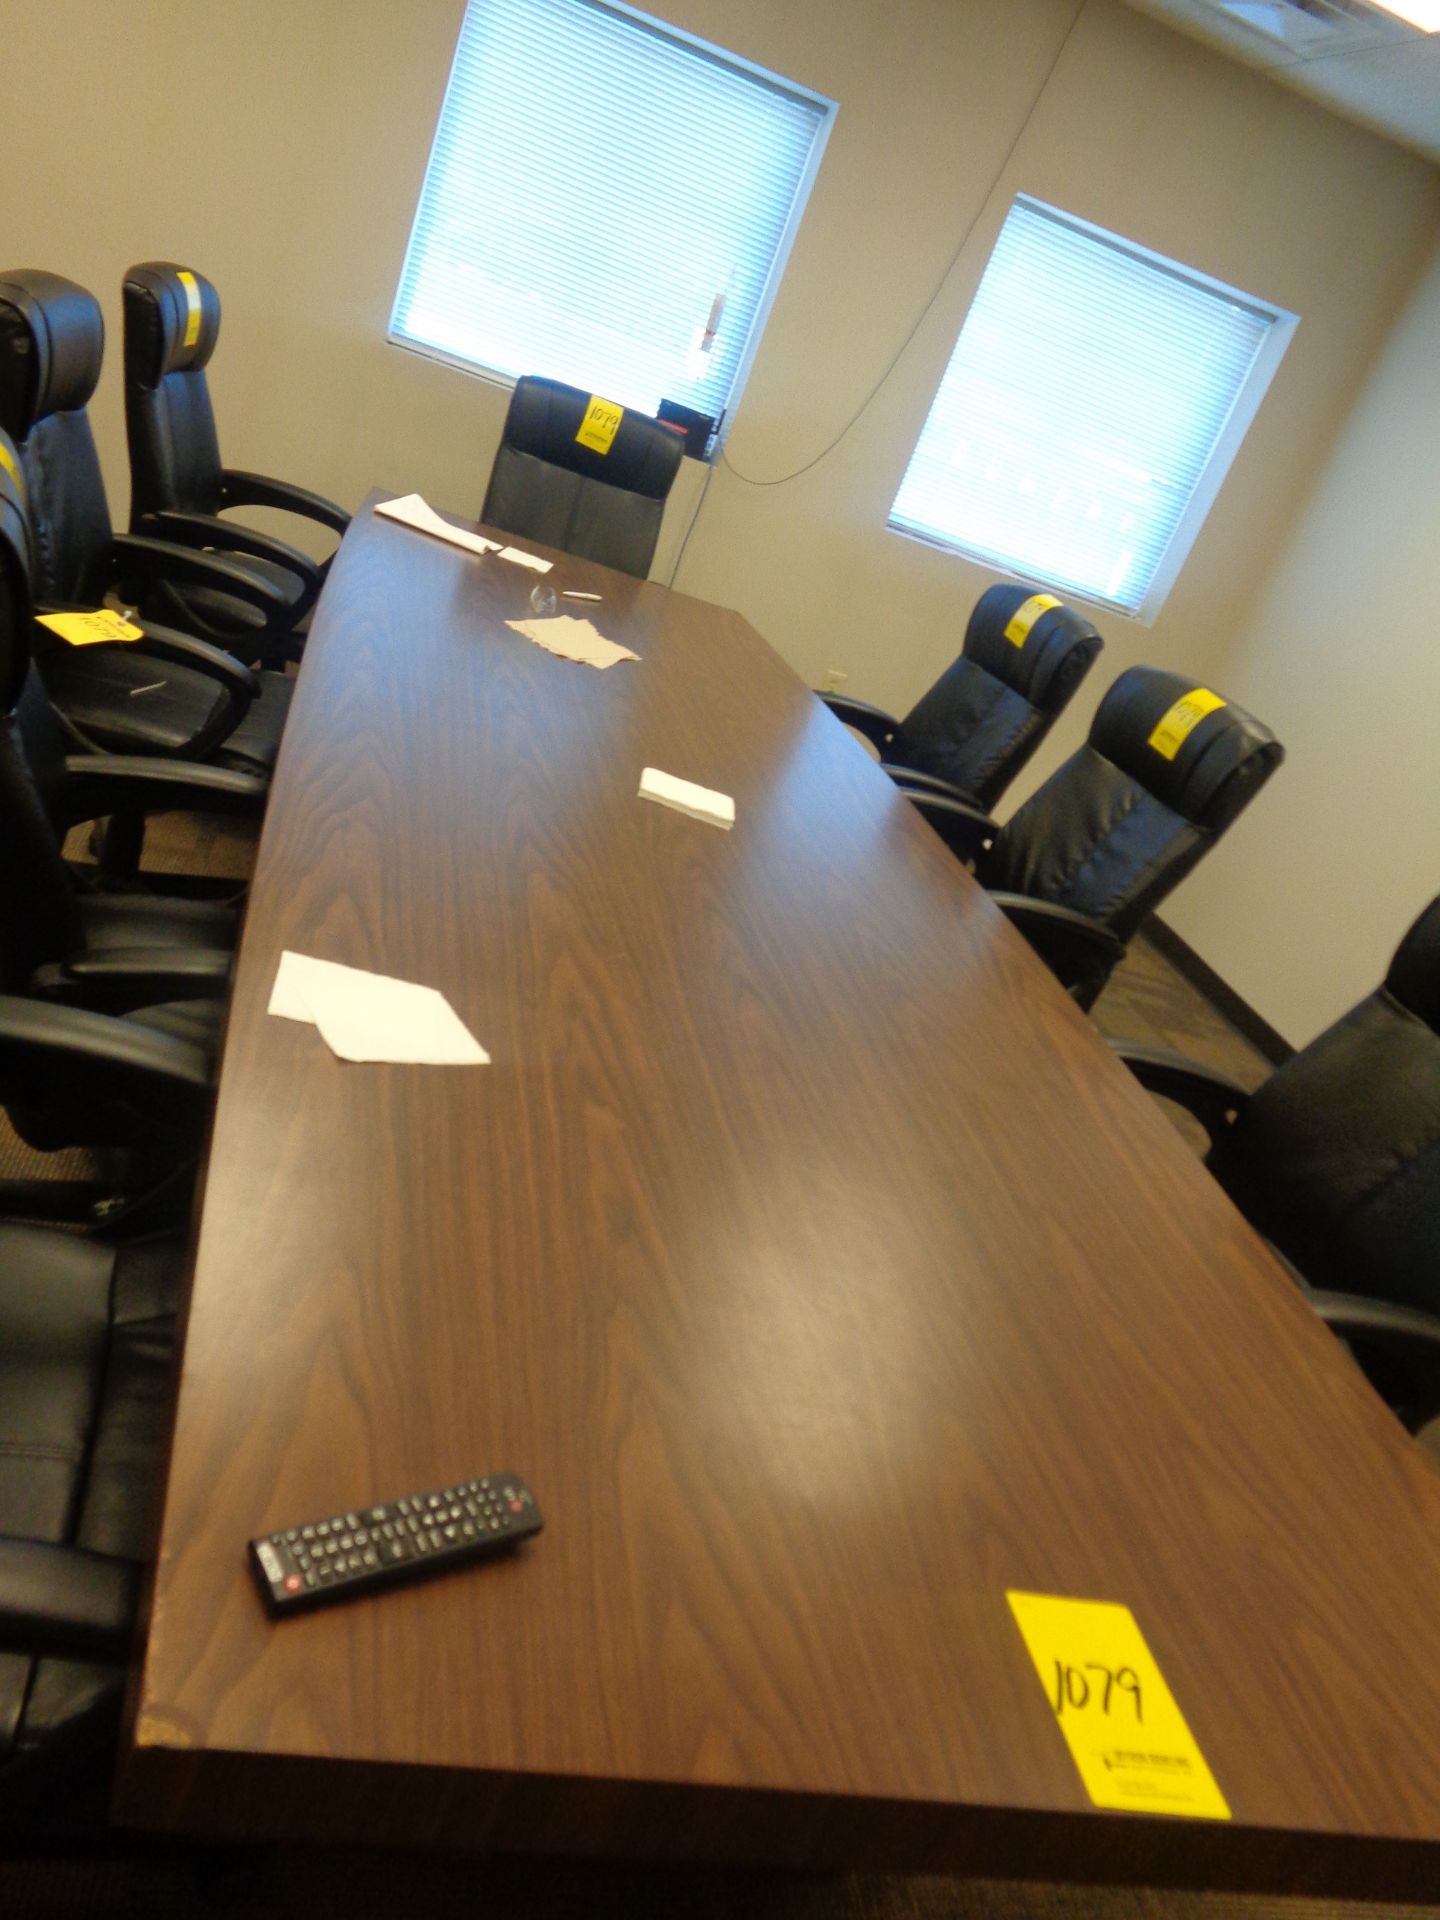 CONFERENCE TABLE WITH (10) CHAIRS